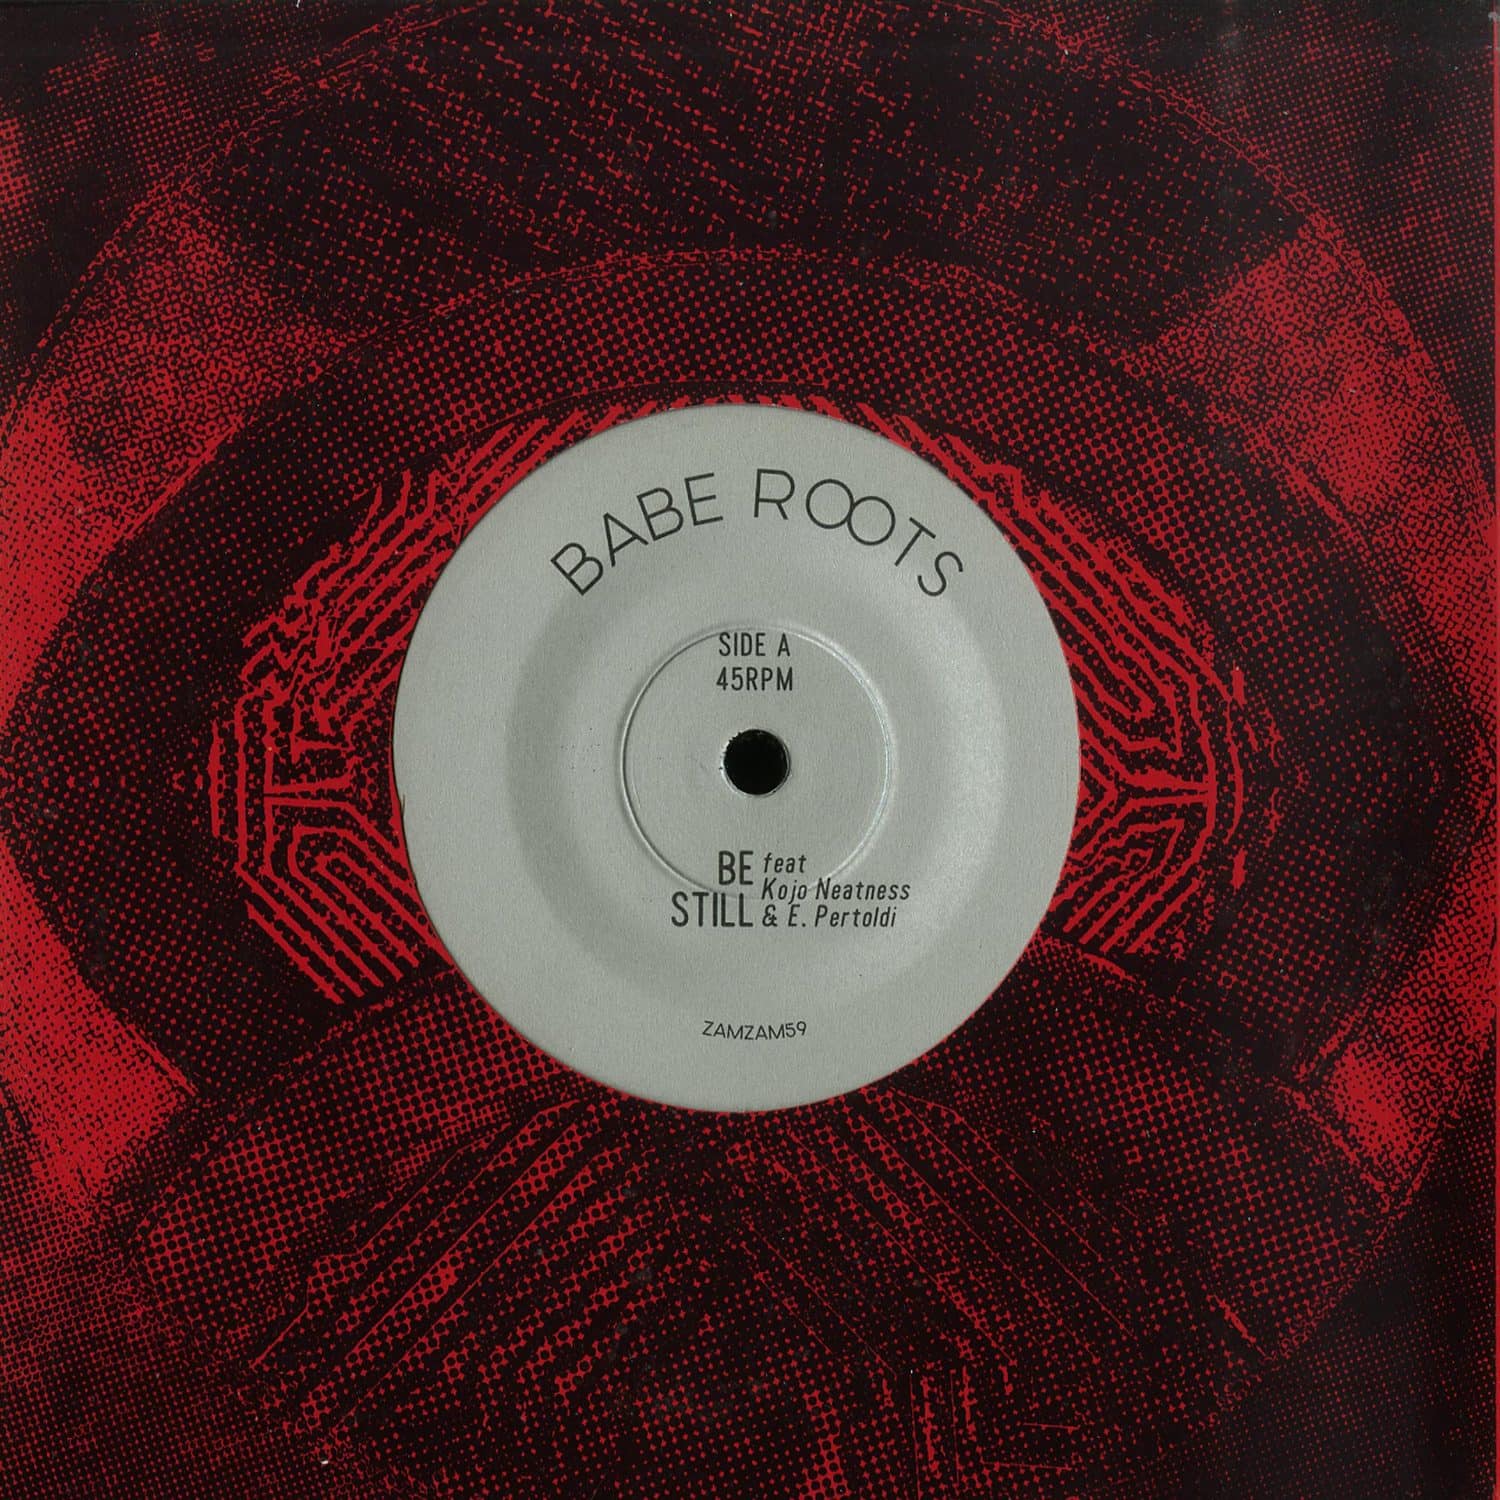 Babe Roots - BE STILL / RAWNESS 